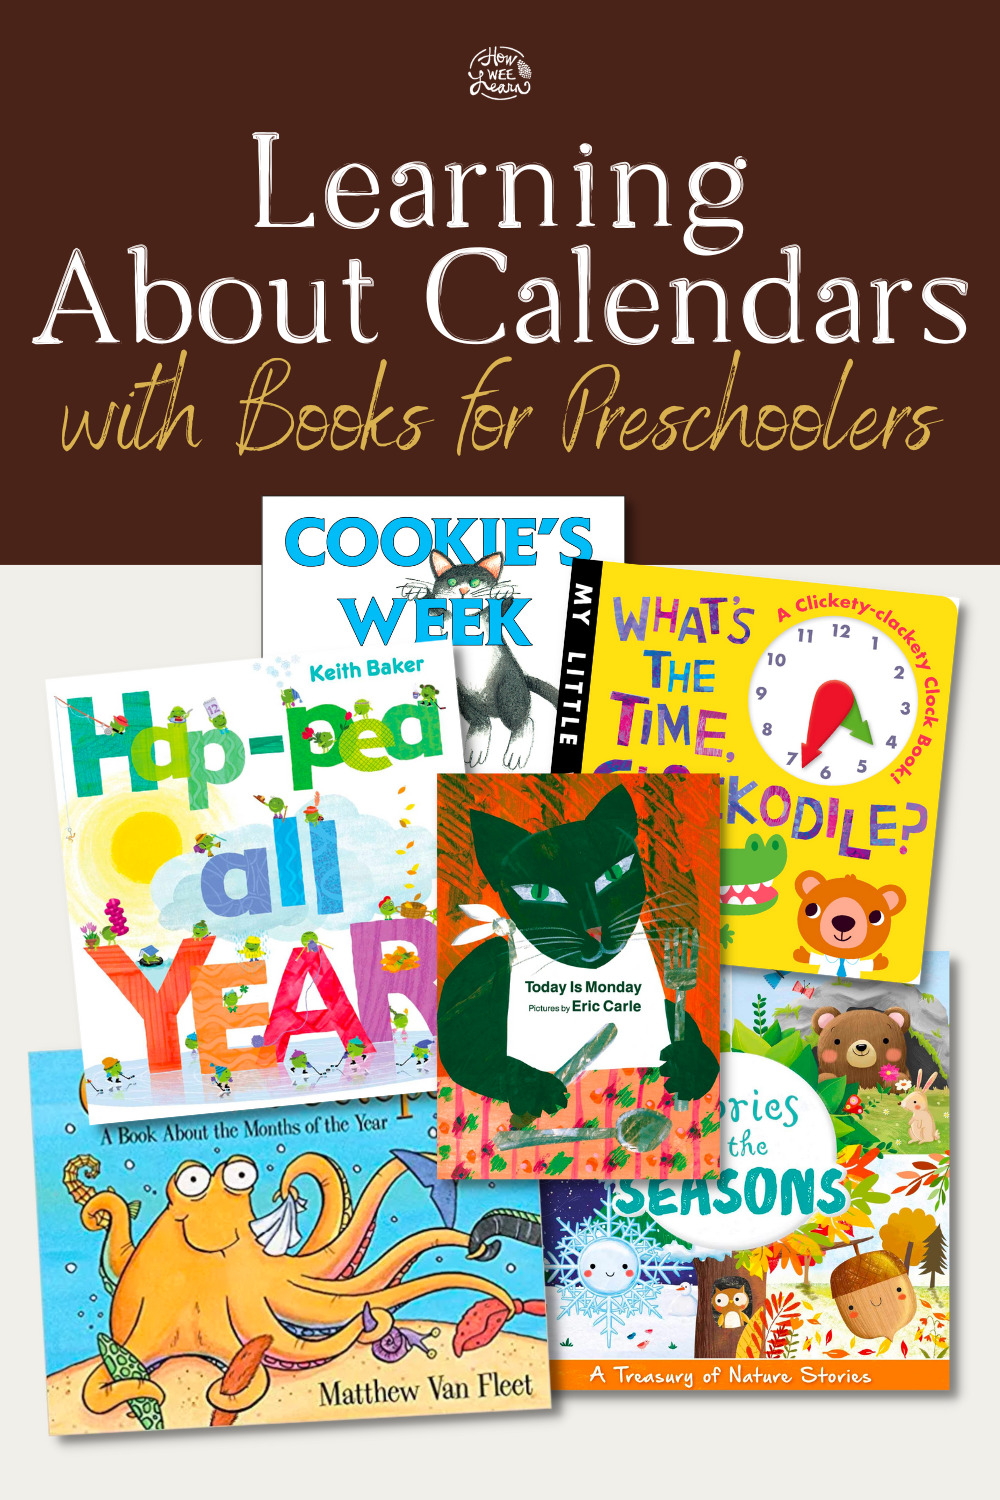 Learning About Calendars with Books for Preschoolers